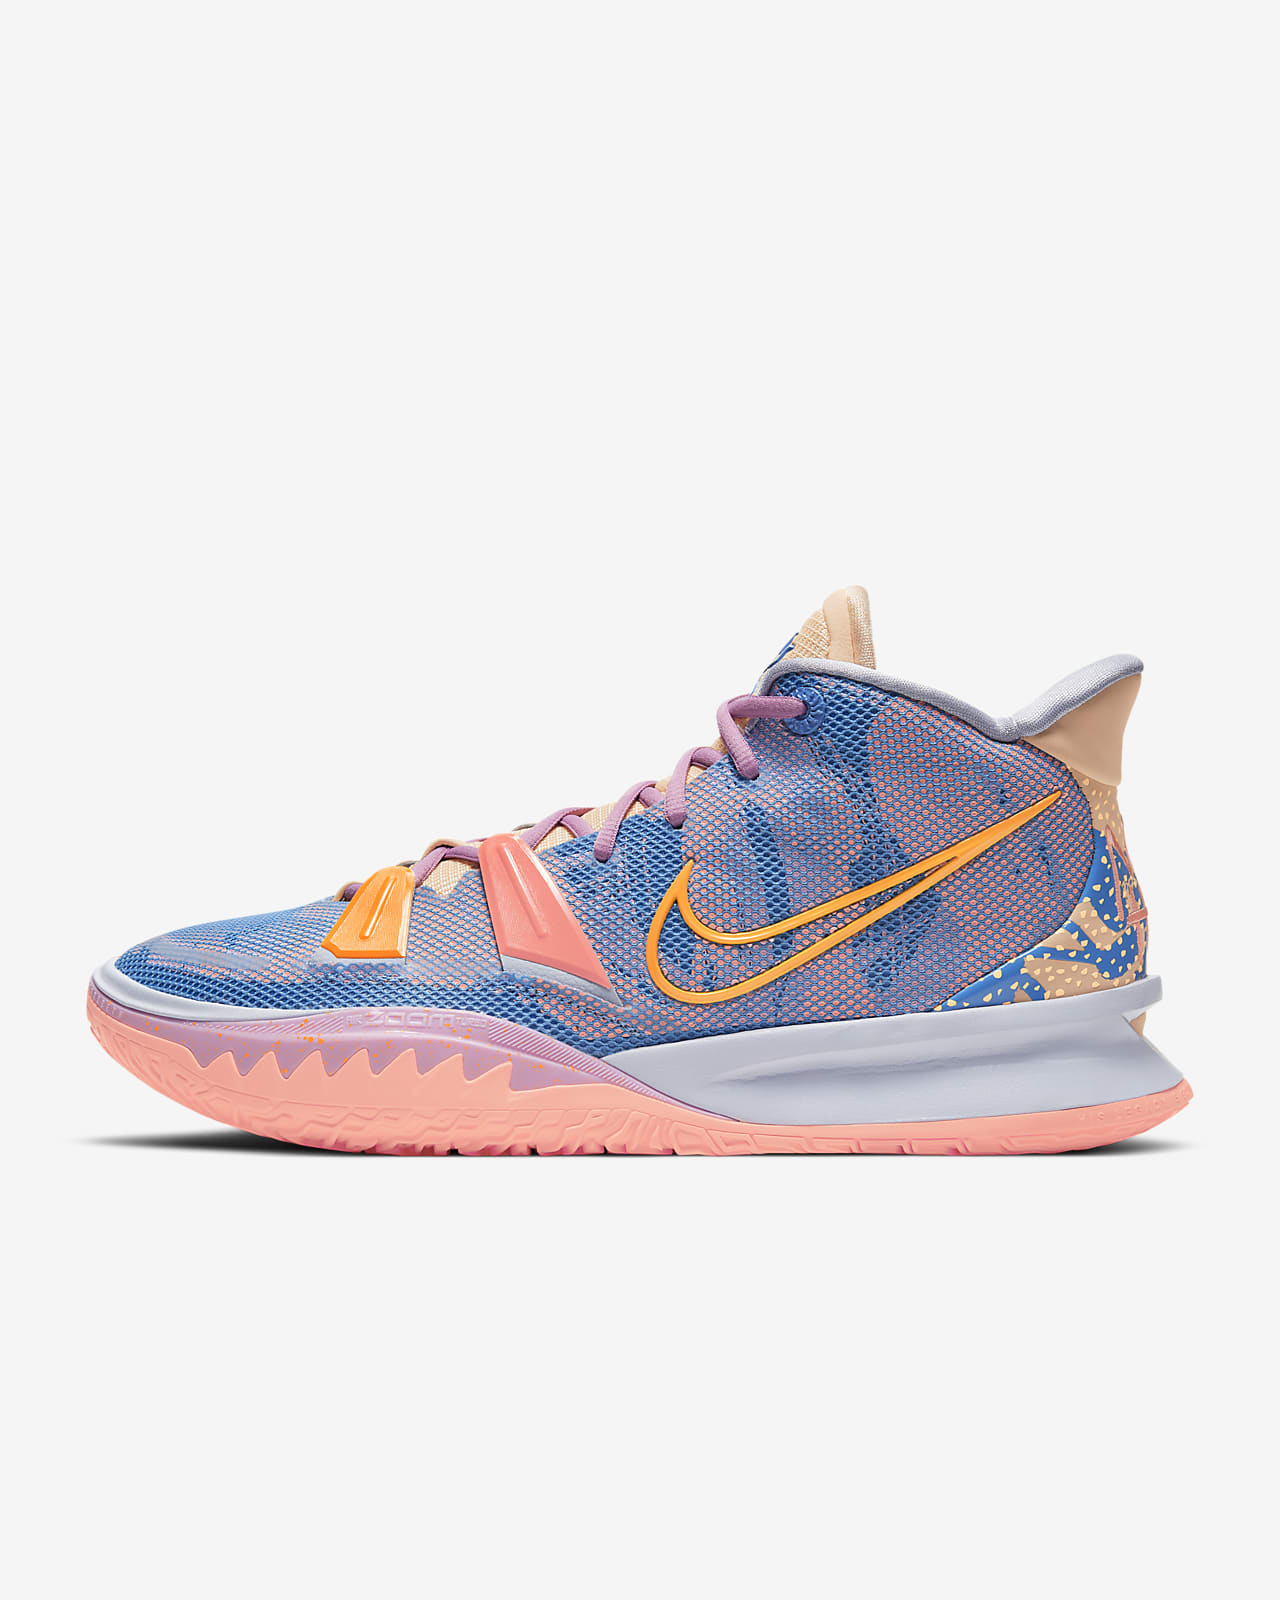 kyrie basket ball shoes